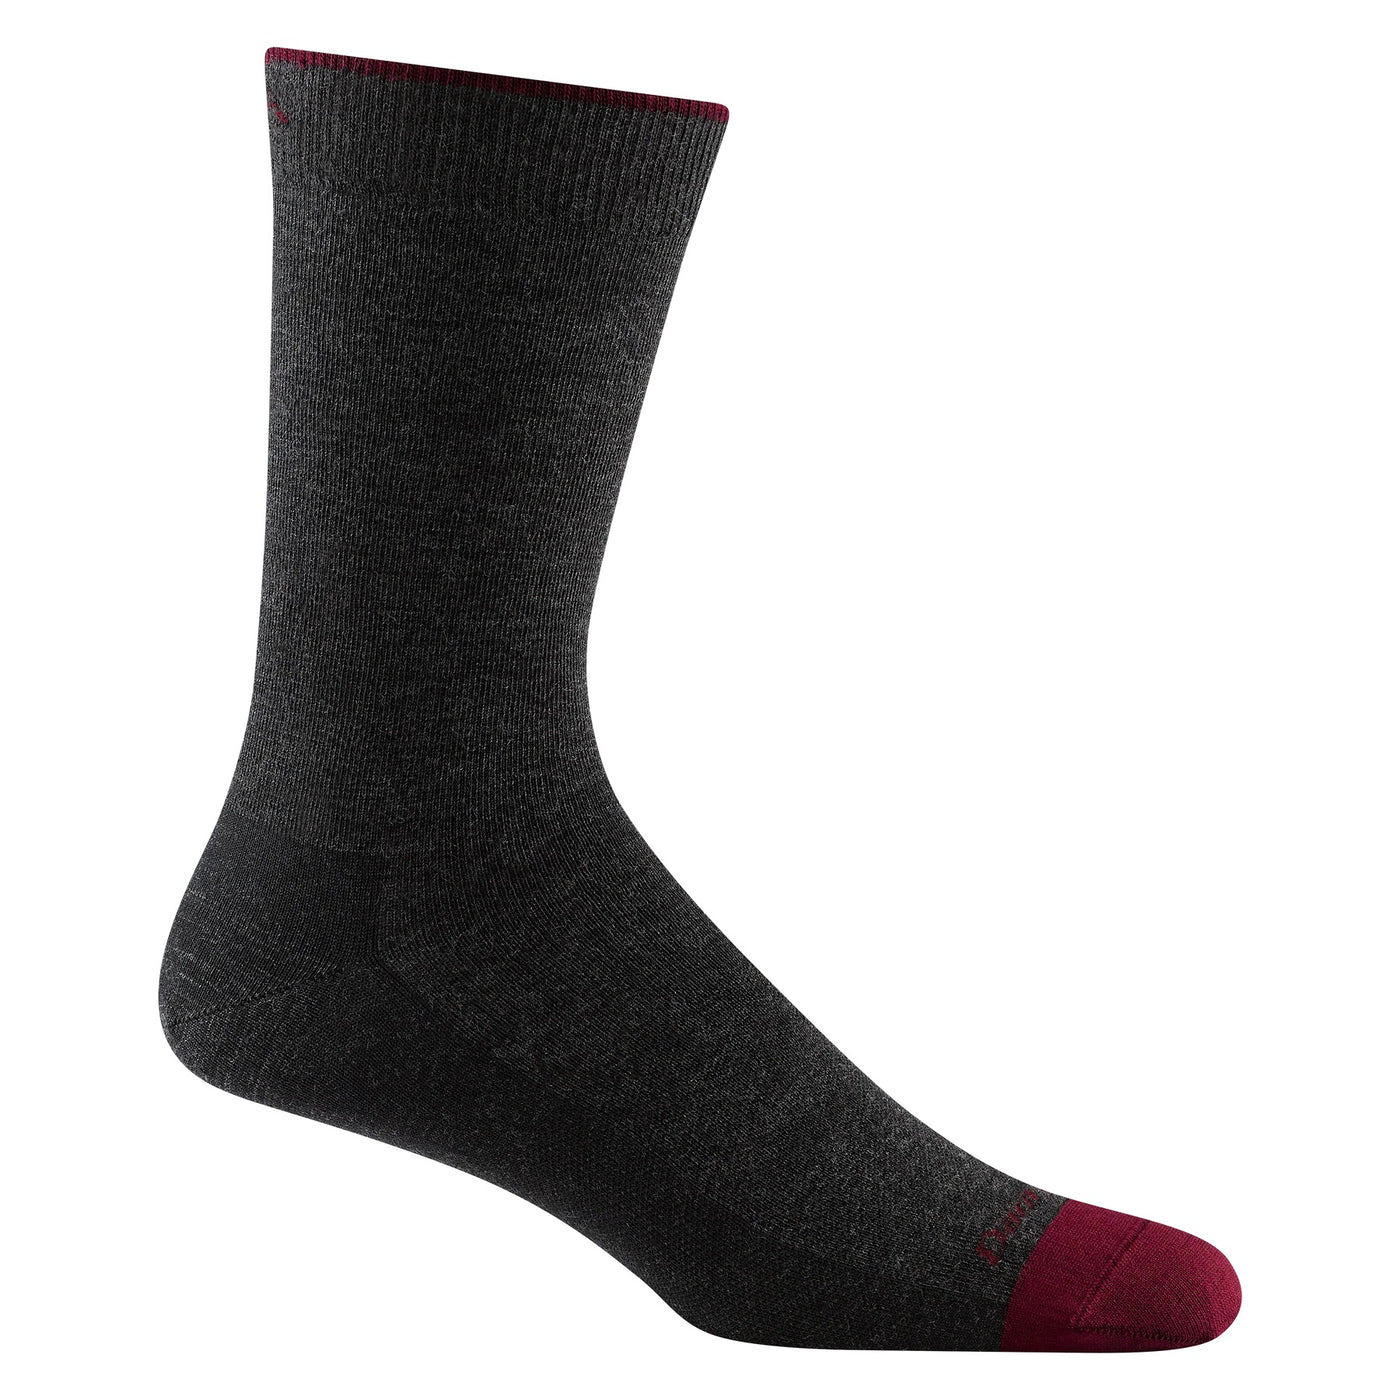 DARN TOUGH #6032 MEN'S SOLID CREW LIGHTWEIGHT LIFESTYLE SOCK - CHARCOAL